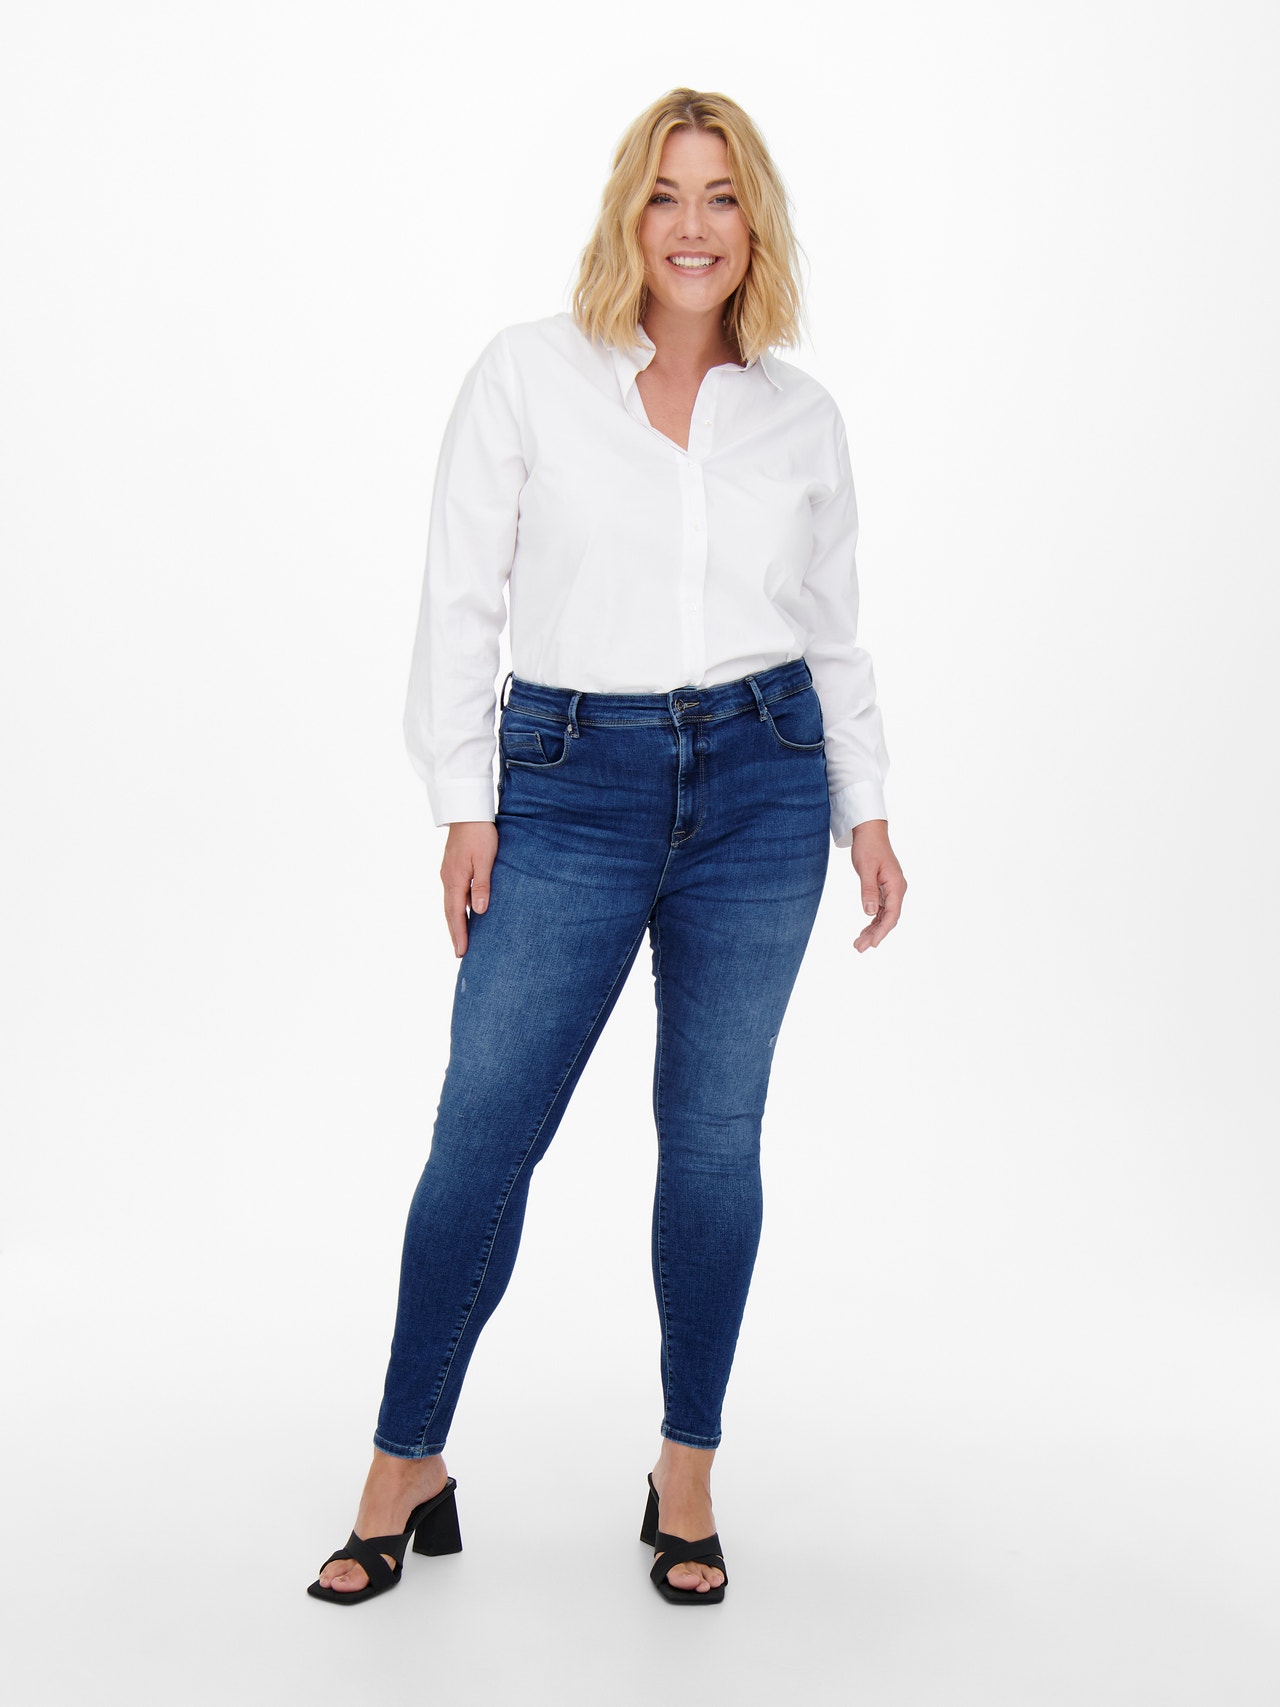 ONLY Skinny Fit Hohe Taille Curve Jeans -Medium Blue Denim - 15267787